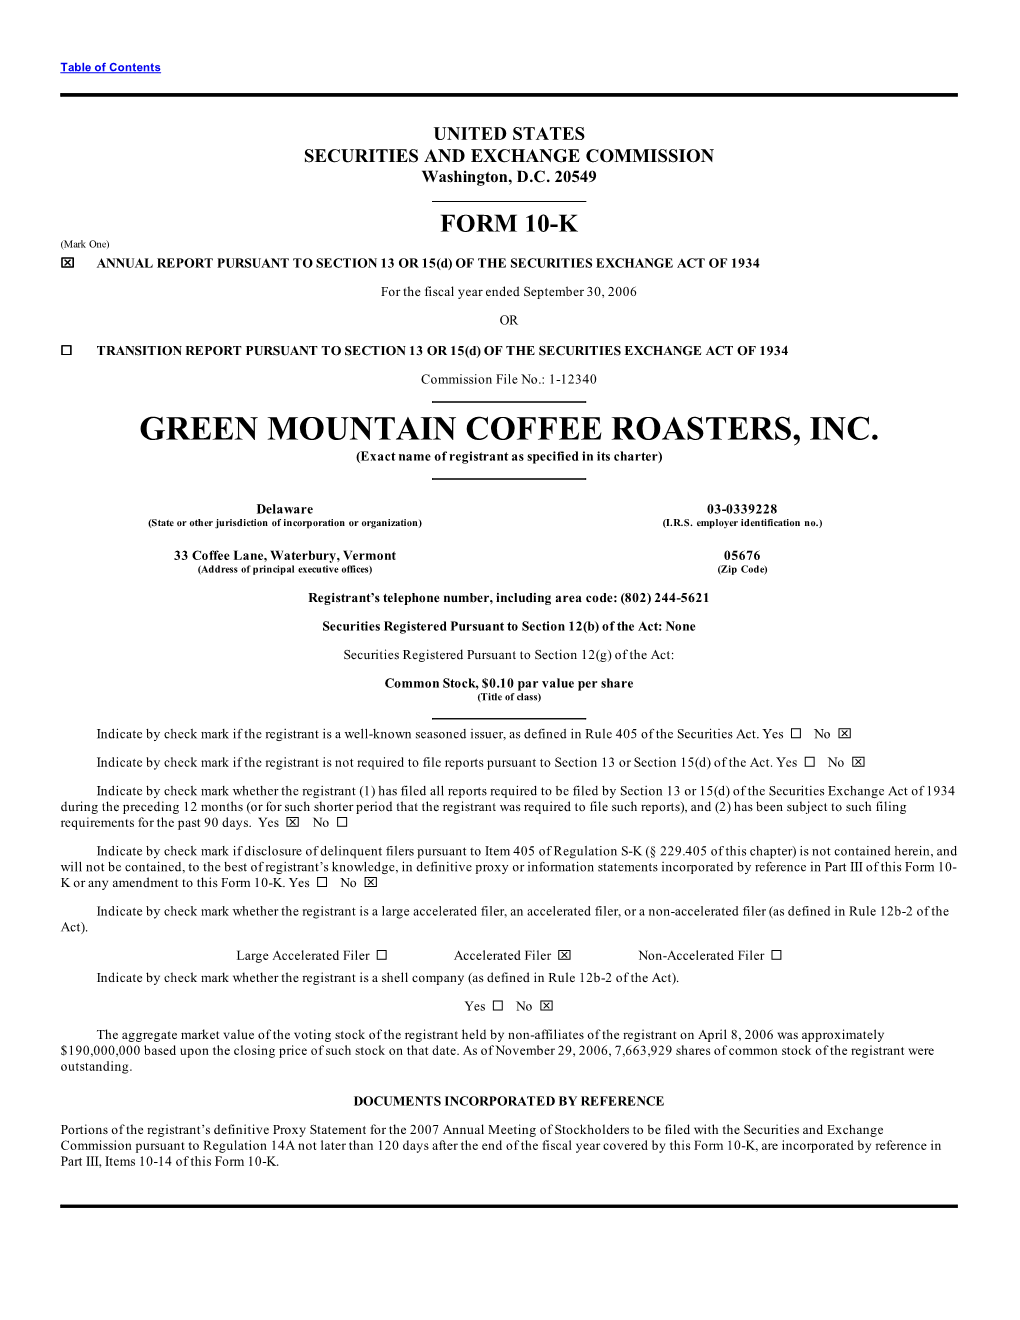 GREEN MOUNTAIN COFFEE ROASTERS, INC. (Exact Name of Registrant As Specified in Its Charter)